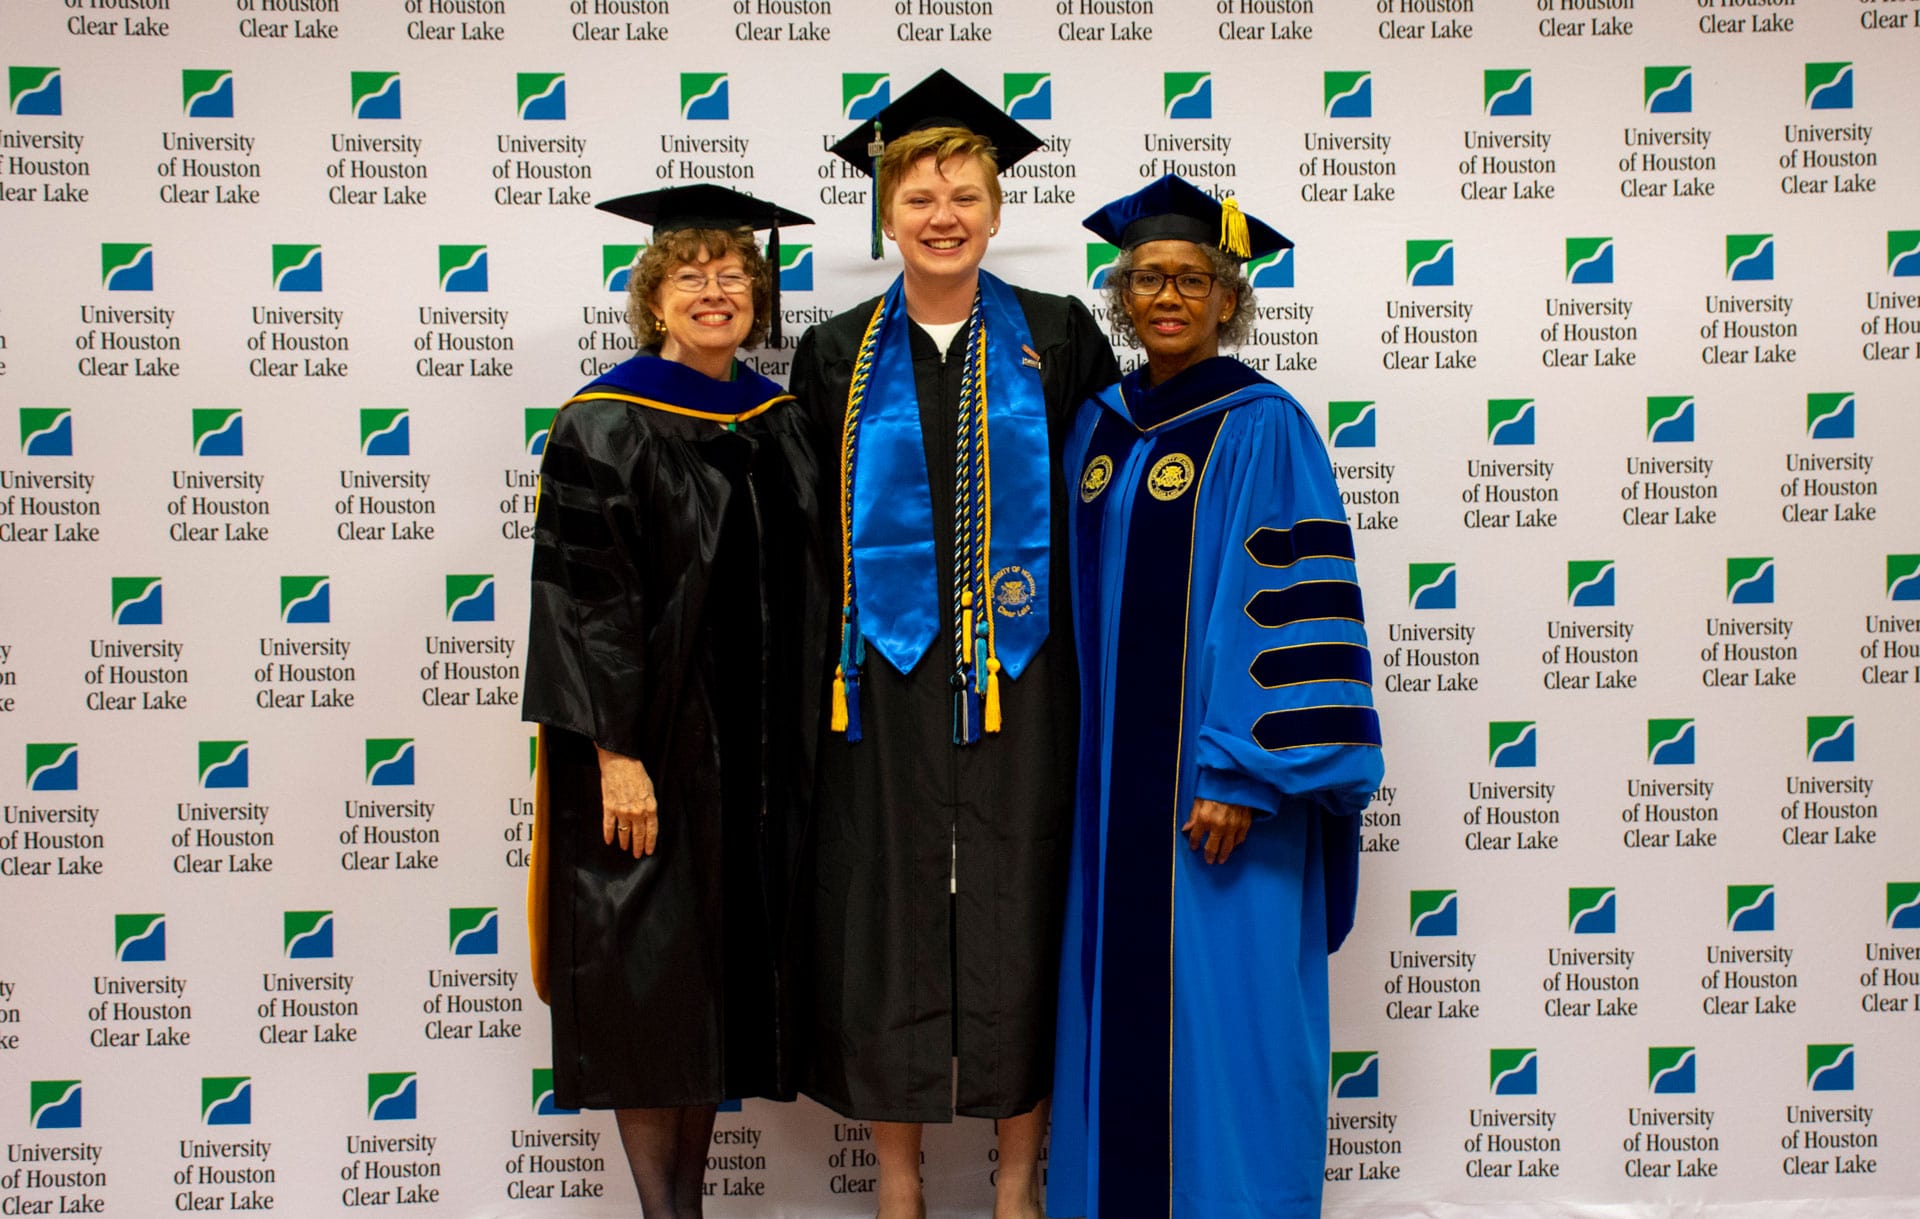 President Blake with Dr. Biggers and Madison Stults